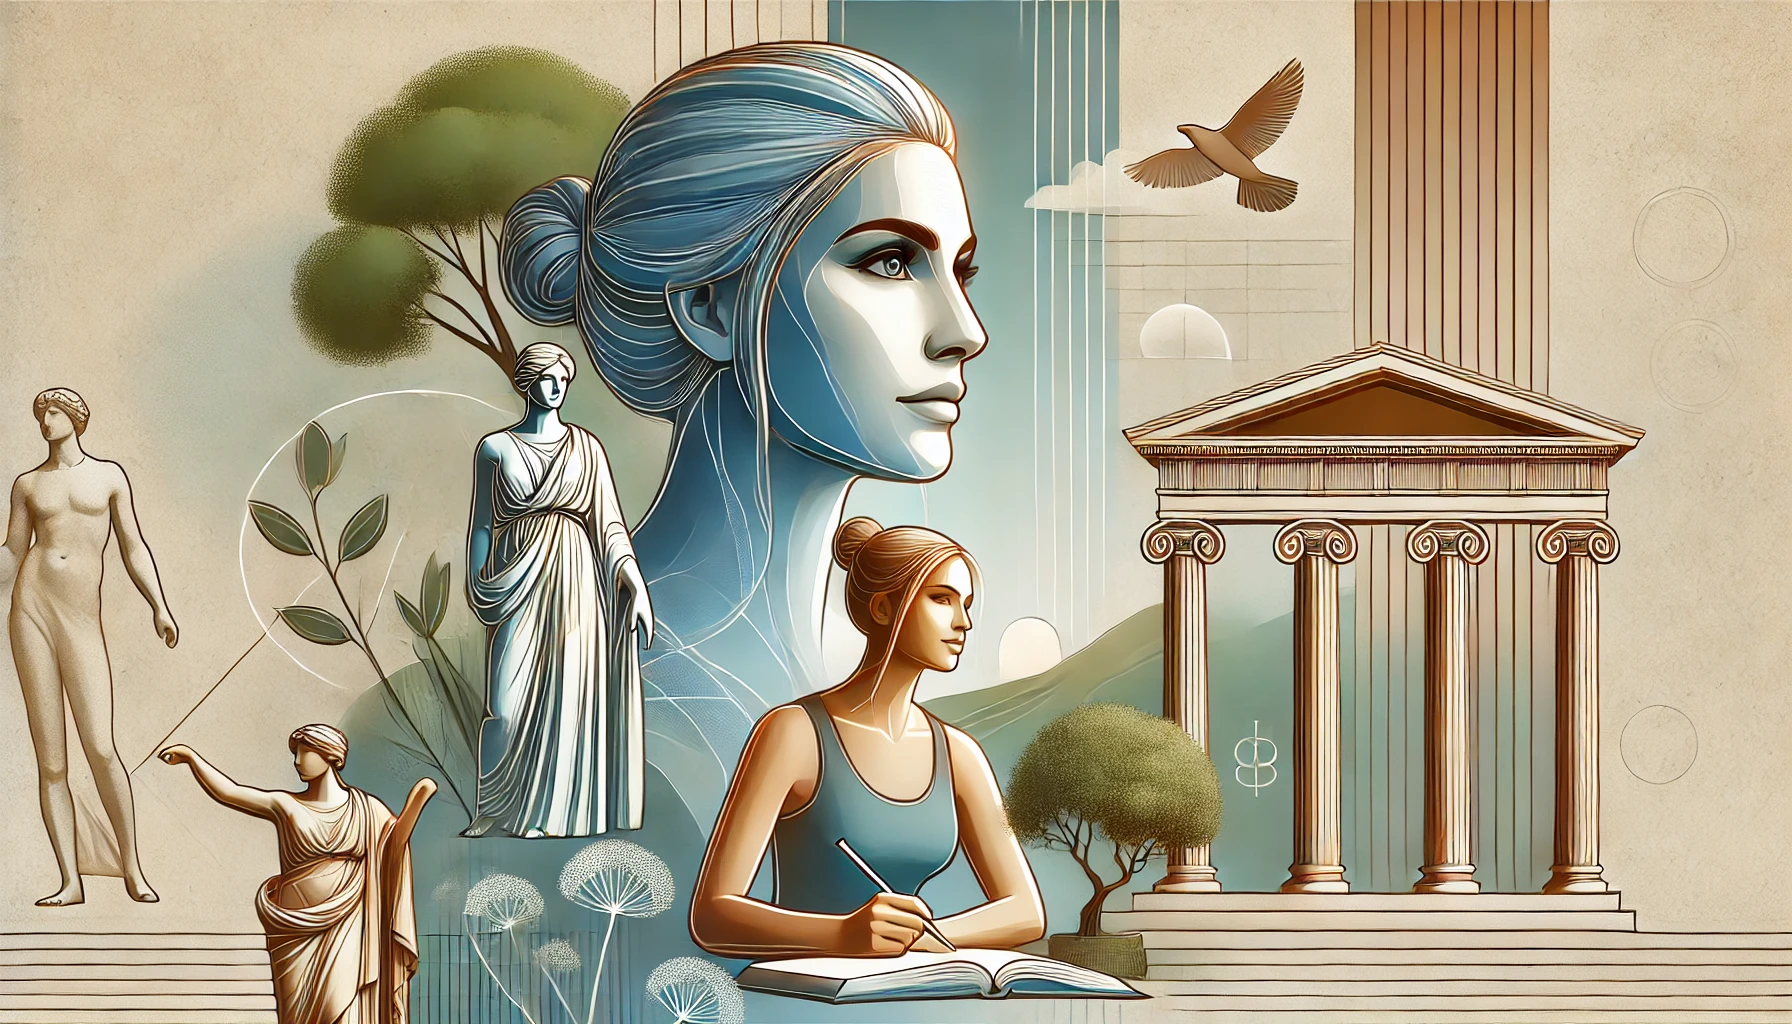 Modern woman practicing Stoic principles like journaling and meditation in a serene setting with Greek columns in the background, symbolizing ancient wisdom.